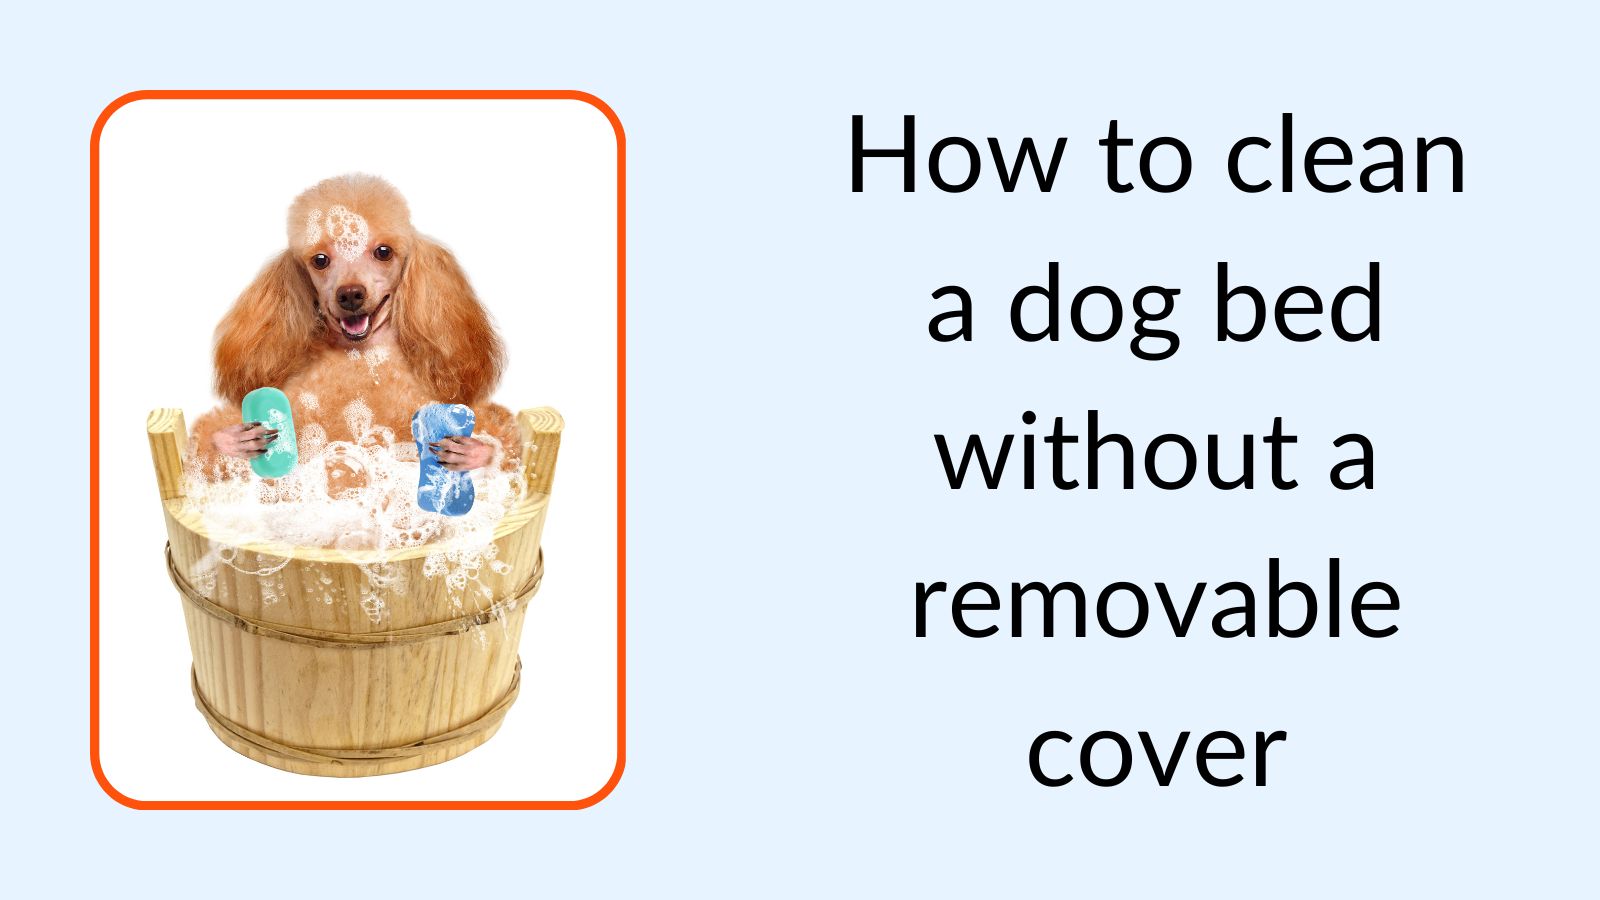 How to clean a dog bed without a removable cover